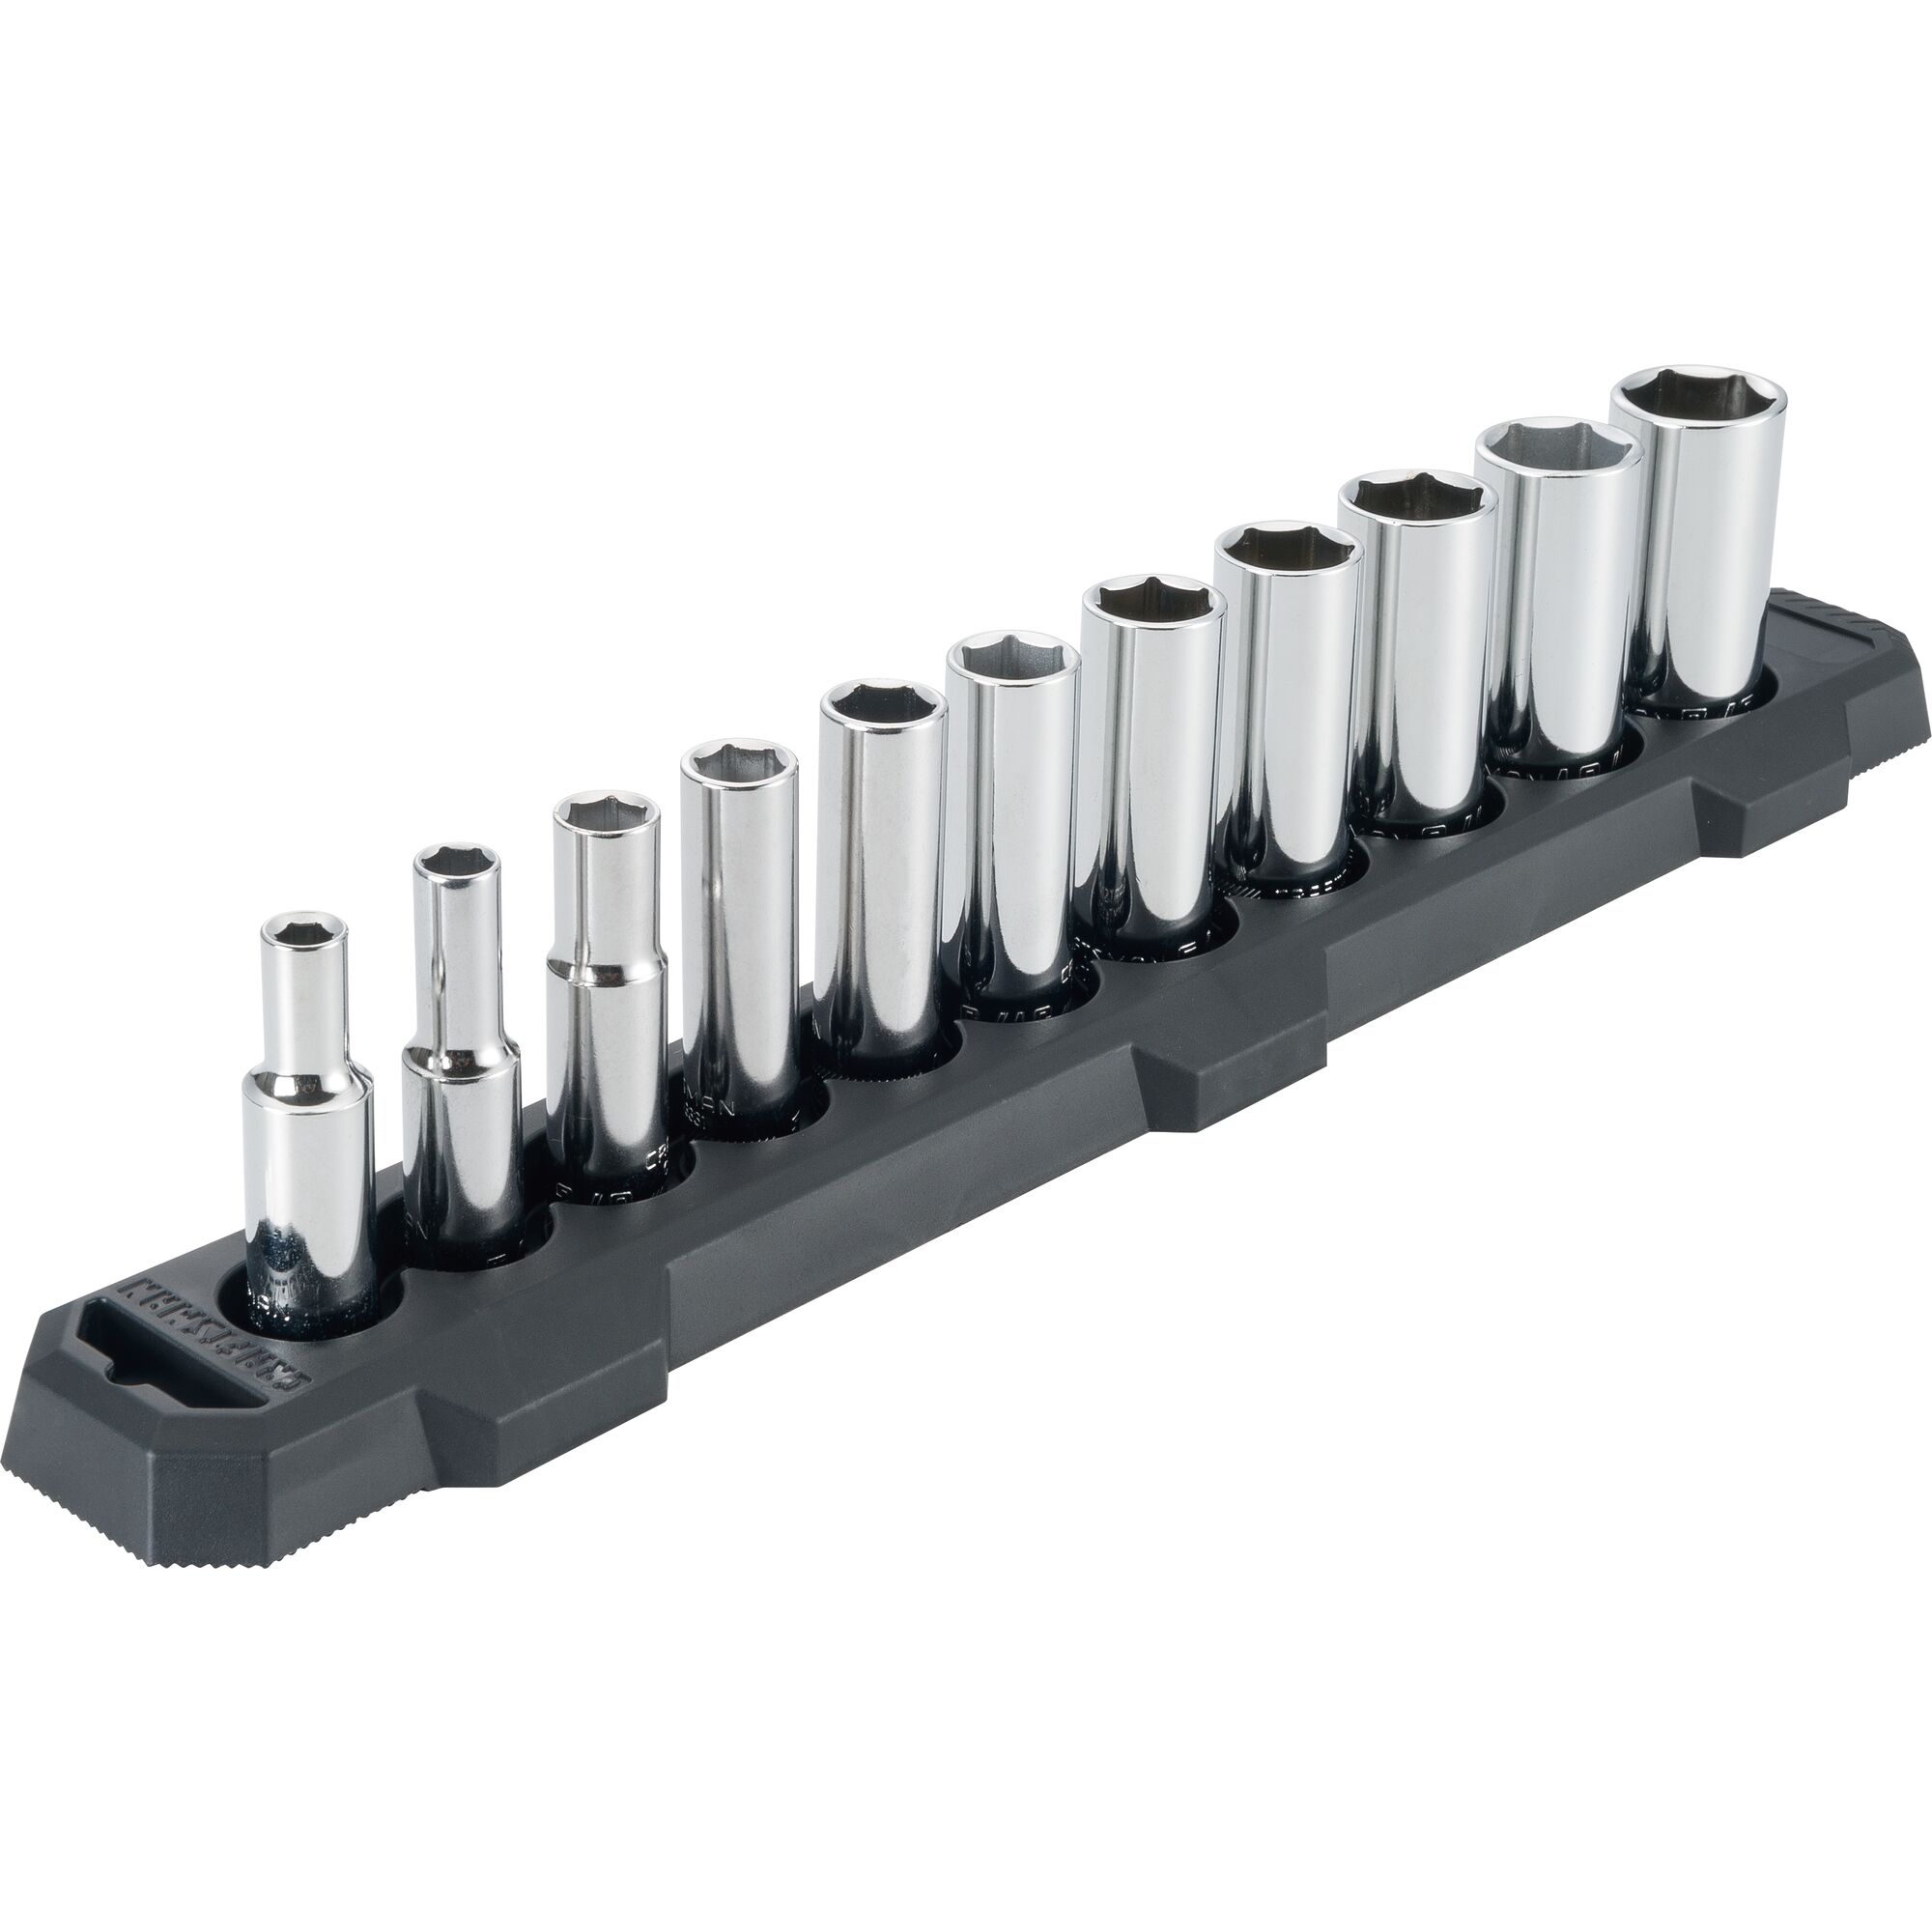 View of CRAFTSMAN Sockets: 6-Point on white background